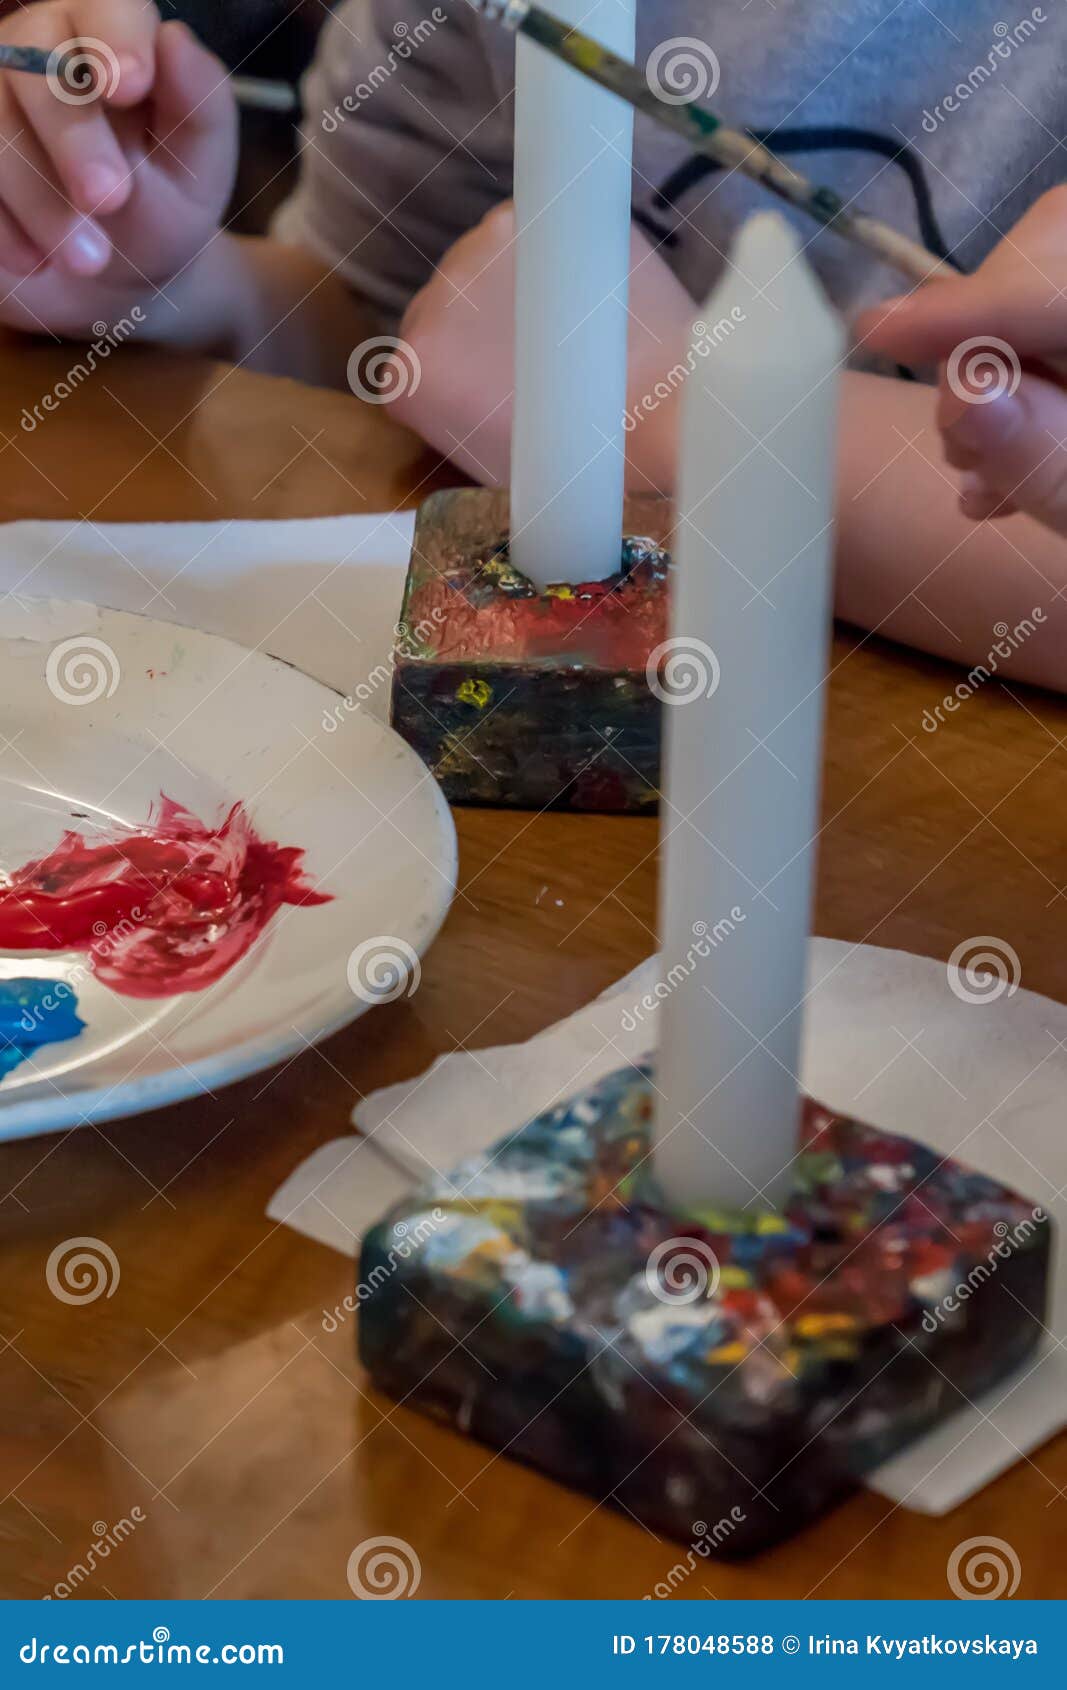 children colorize candles with acrylic paints